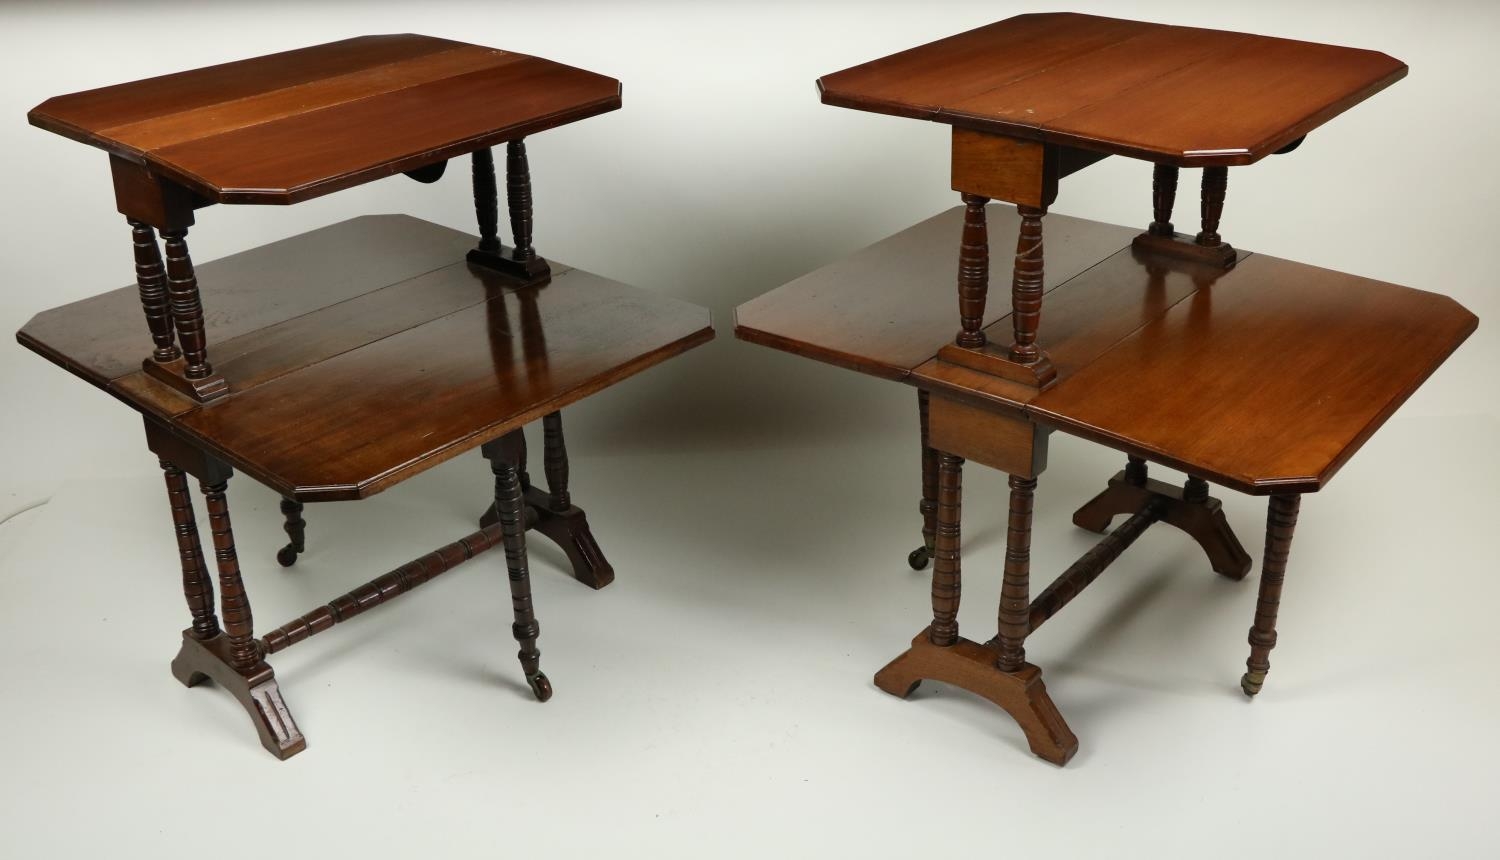 An unusual pair of Edwardian walnut two tier Sutherland Tables, each tier with two rectangular flaps - Image 2 of 4